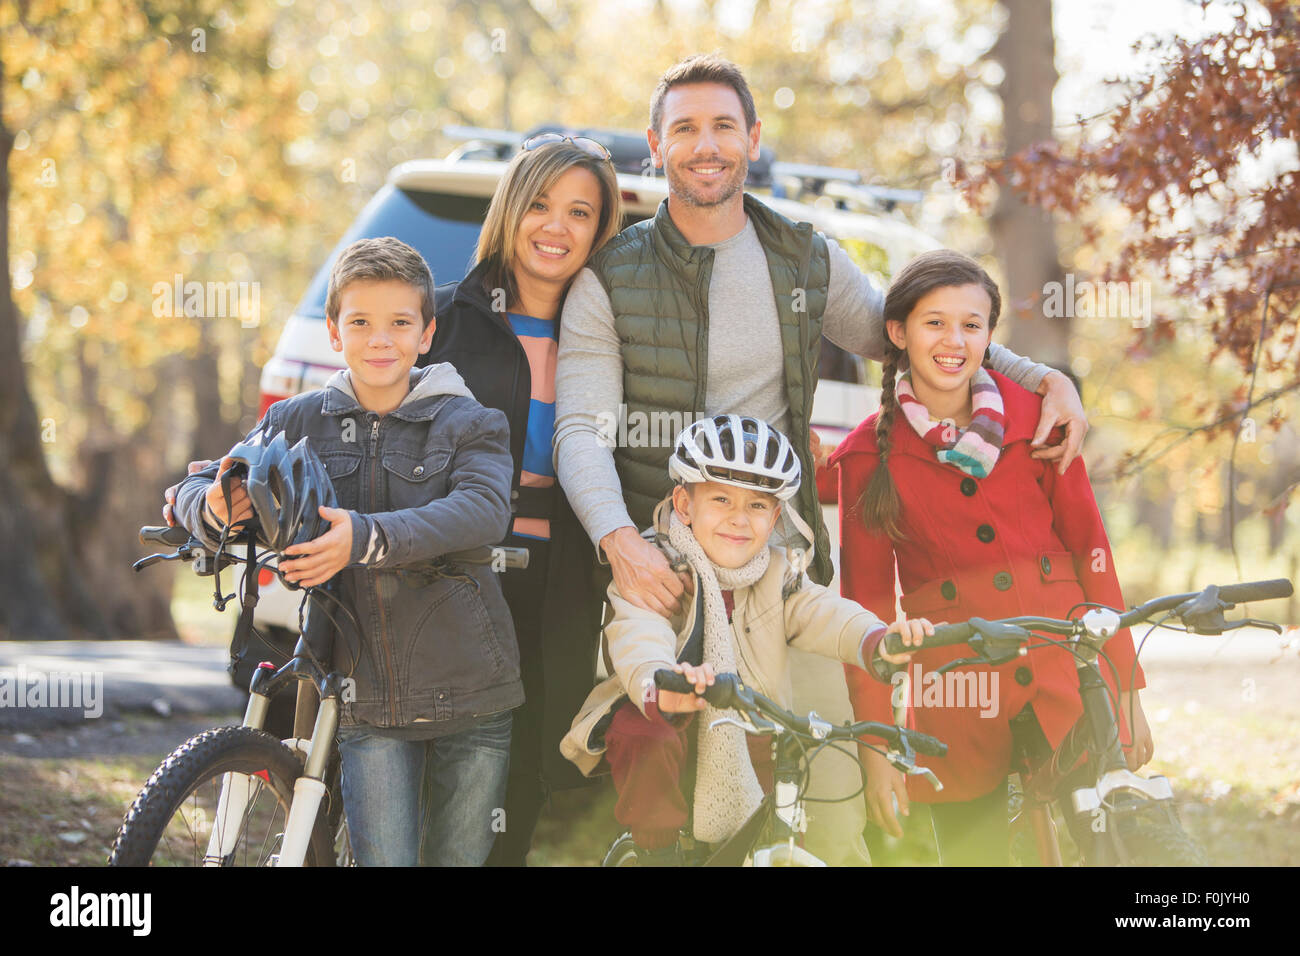 Portrait smiling family with bicycles outdoors Stock Photo